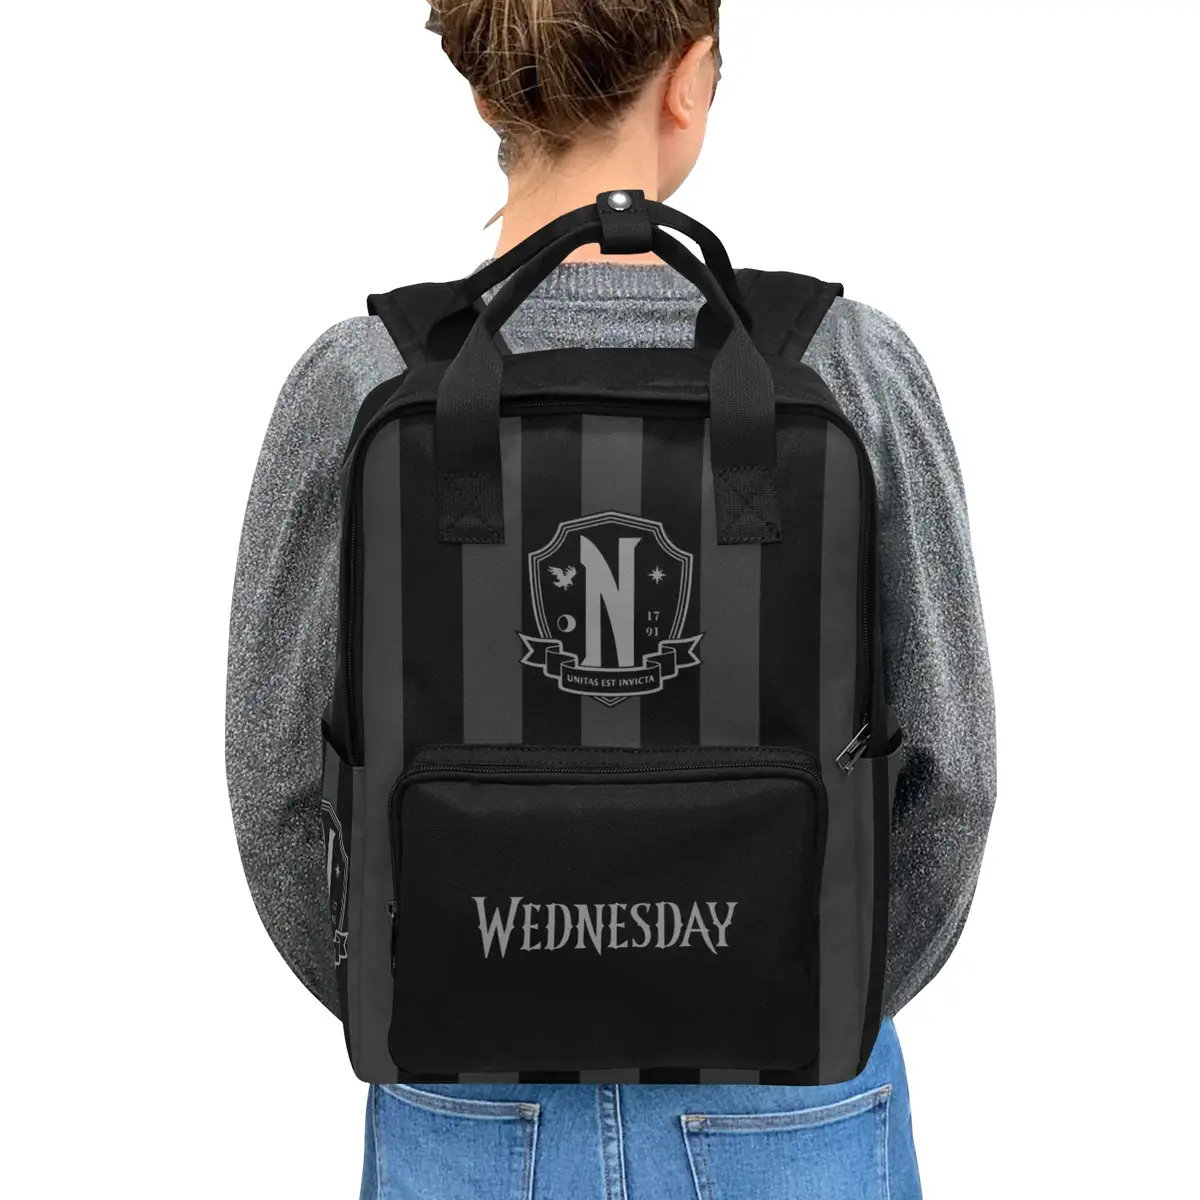 Wednesday Addams Uniform Inspired Backpack, Youth Book Bag for School, Nevermore Academy Rucksack Cool Kiddo 10